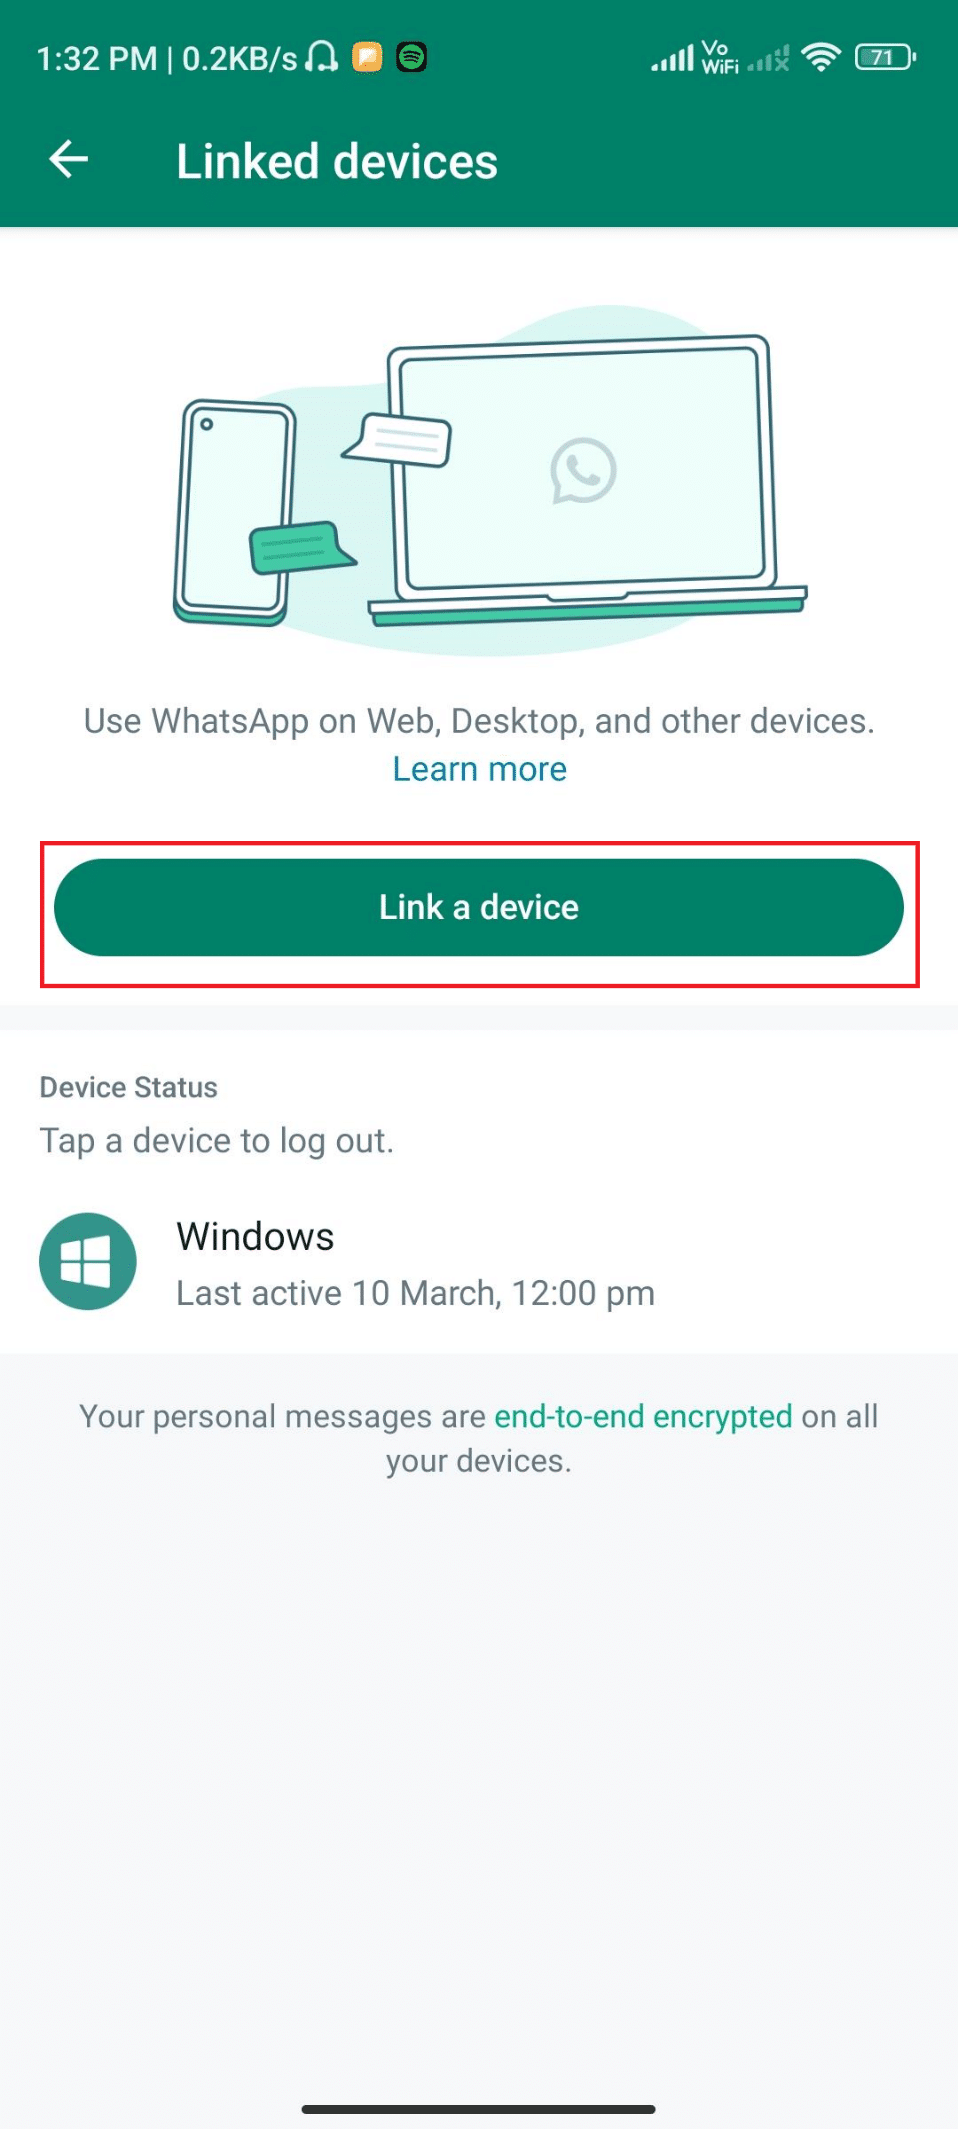 Link a device on whatsapp